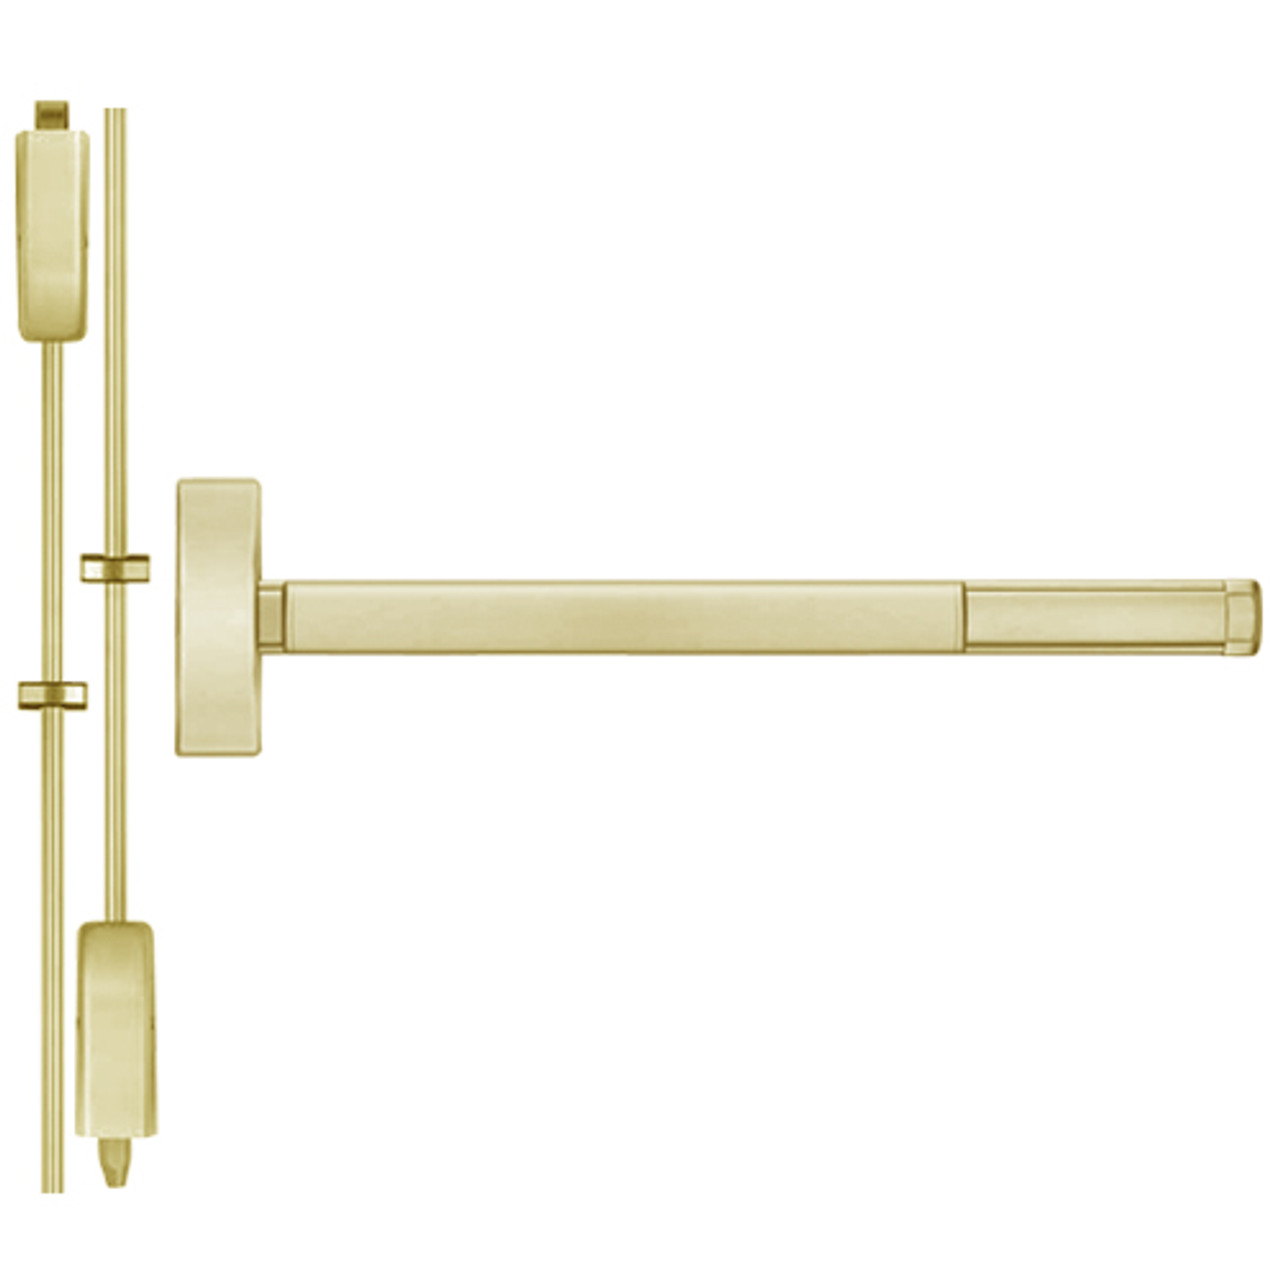 2202-606-36 PHI 2200 Series Non Fire Rated Apex Surface Vertical Rod Exit Device Prepped for Dummy Trim in Satin Brass Finish